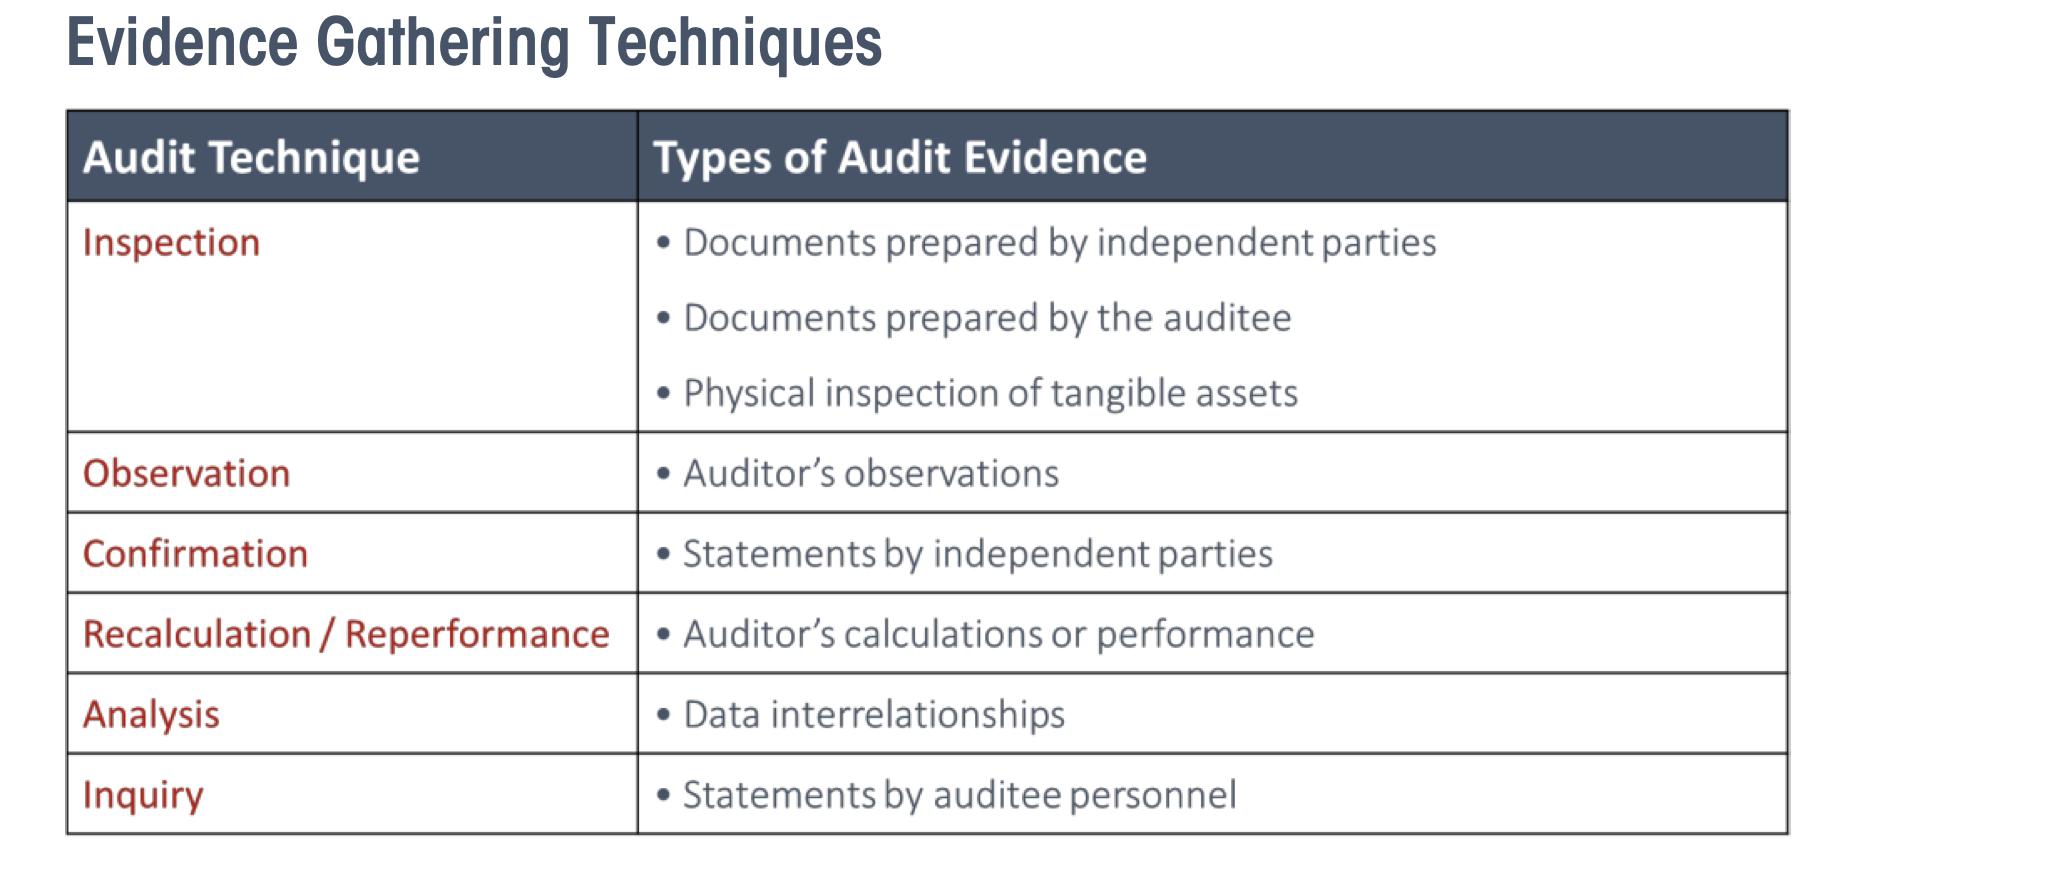 Evidence Gathering Techniques Audit Technique Types of Audit Evidence Inspection • Documents prepared by independent parties